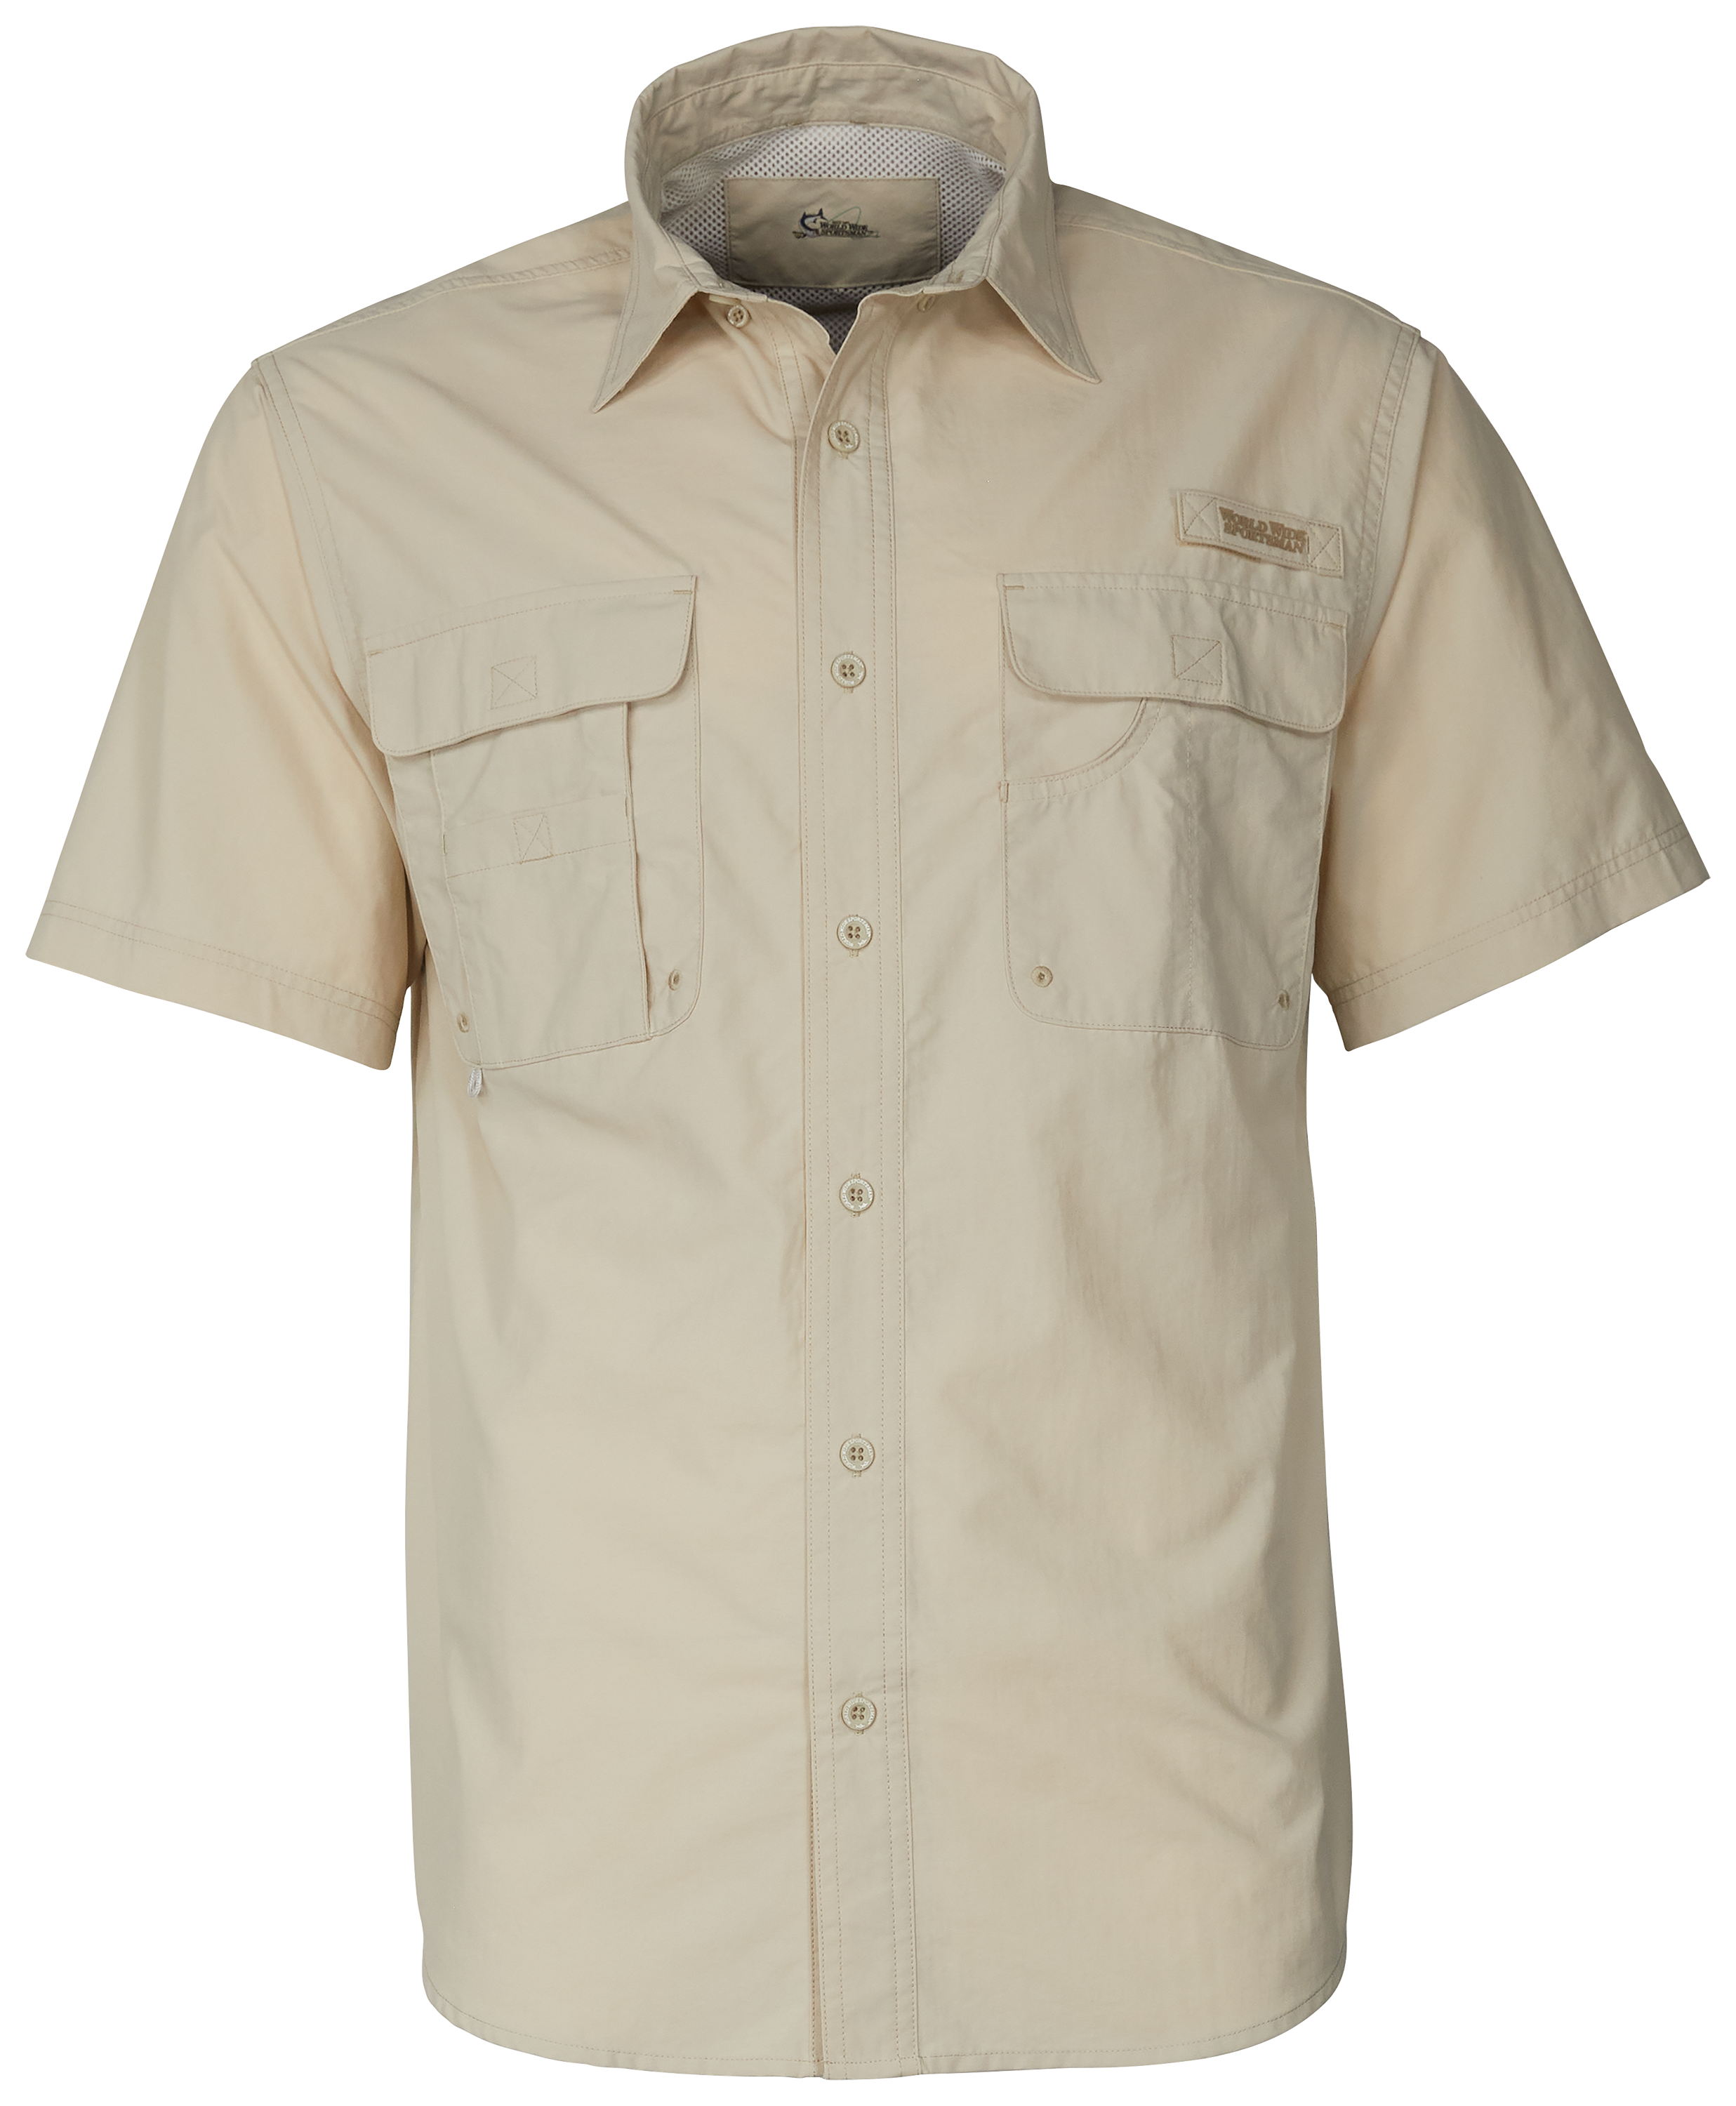 World Wide Sportsman Recycled-Nylon Angler 2.0 Short-Sleeve Button-Down Shirt for Men - Peyote - XL